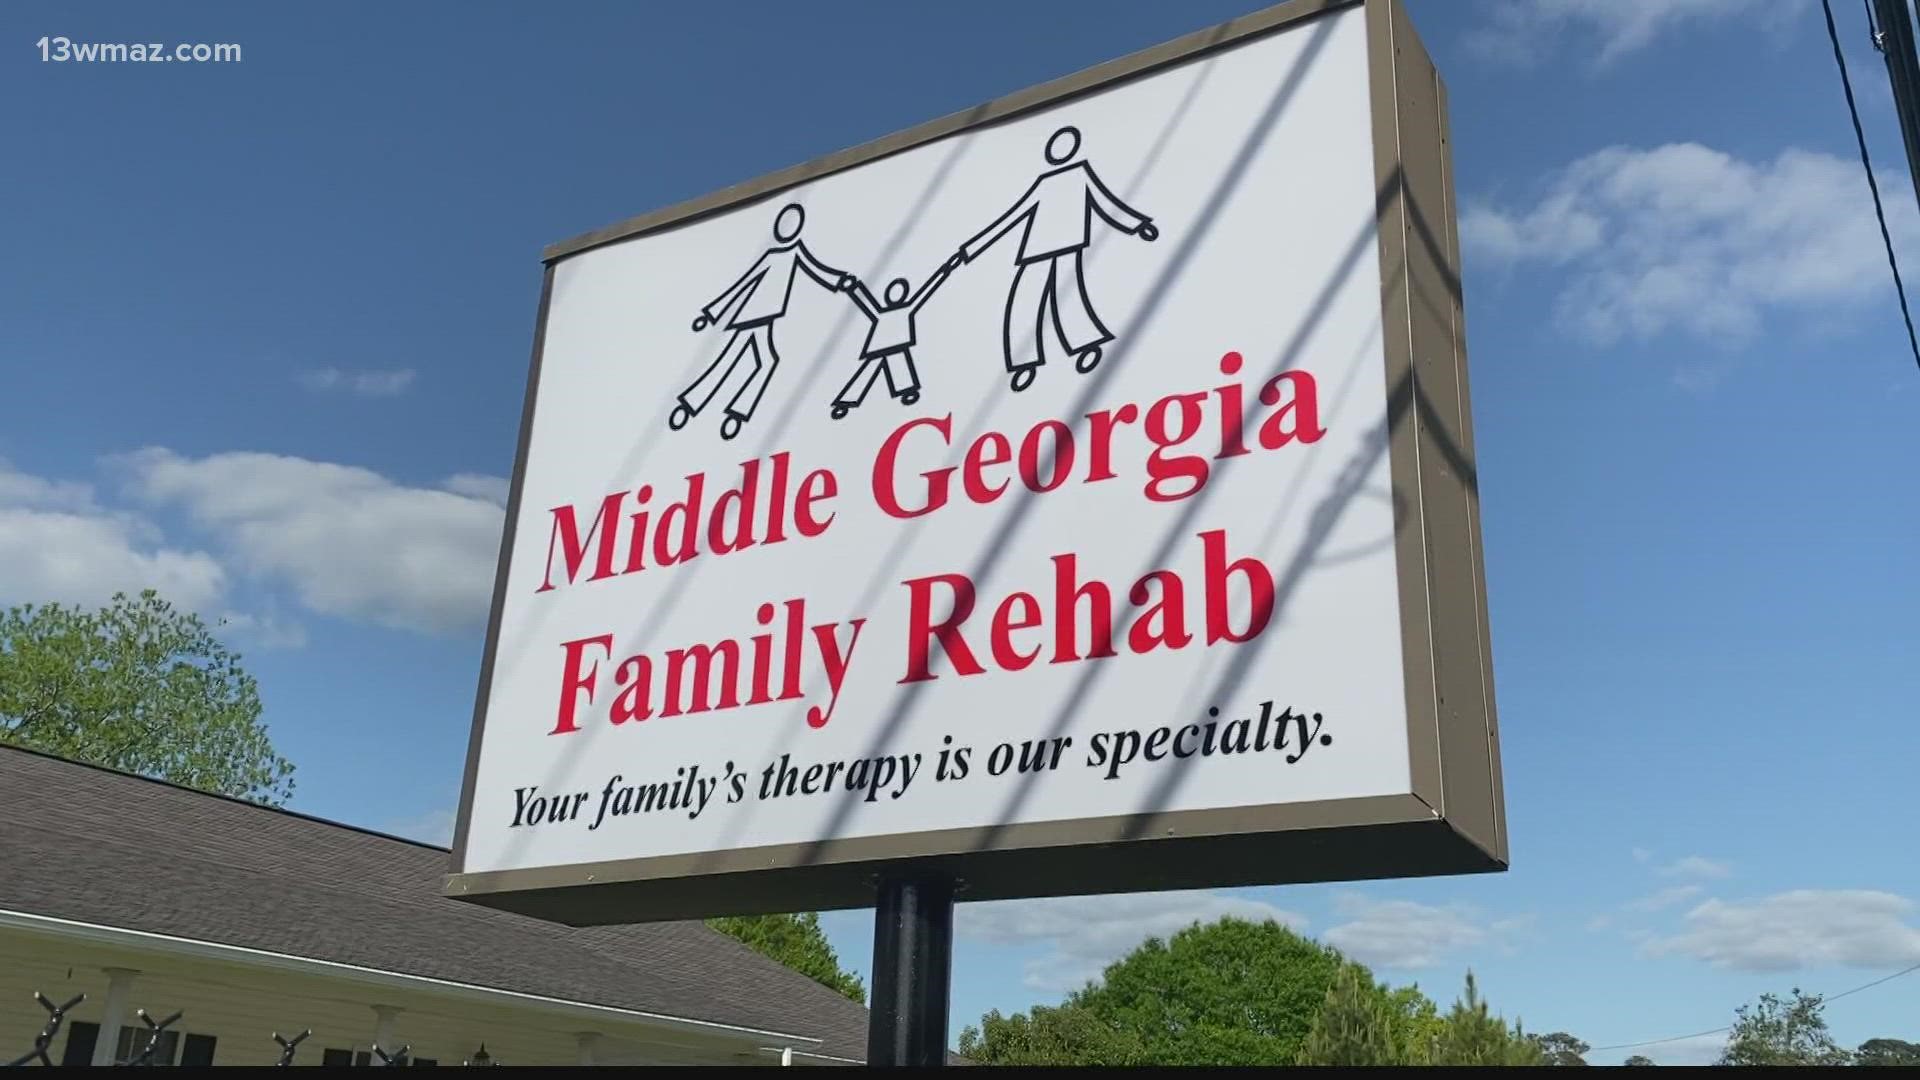 Middle Georgia Family Rehab now owes somewhere between $4-17 million and a hearing for damages has been set.